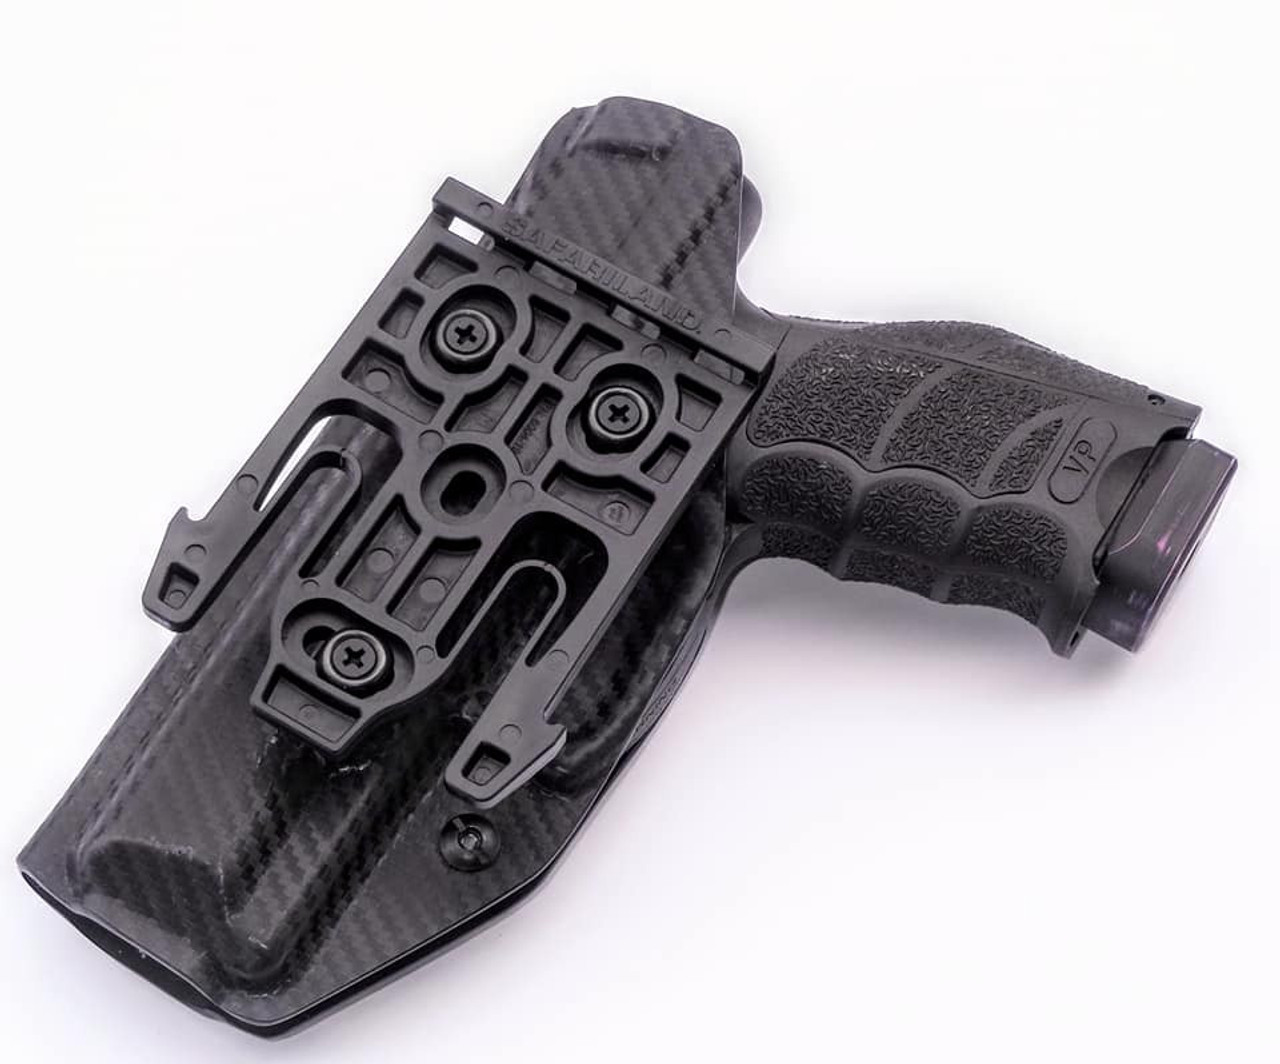 Holster Accessories, Qls Compatible Holsters